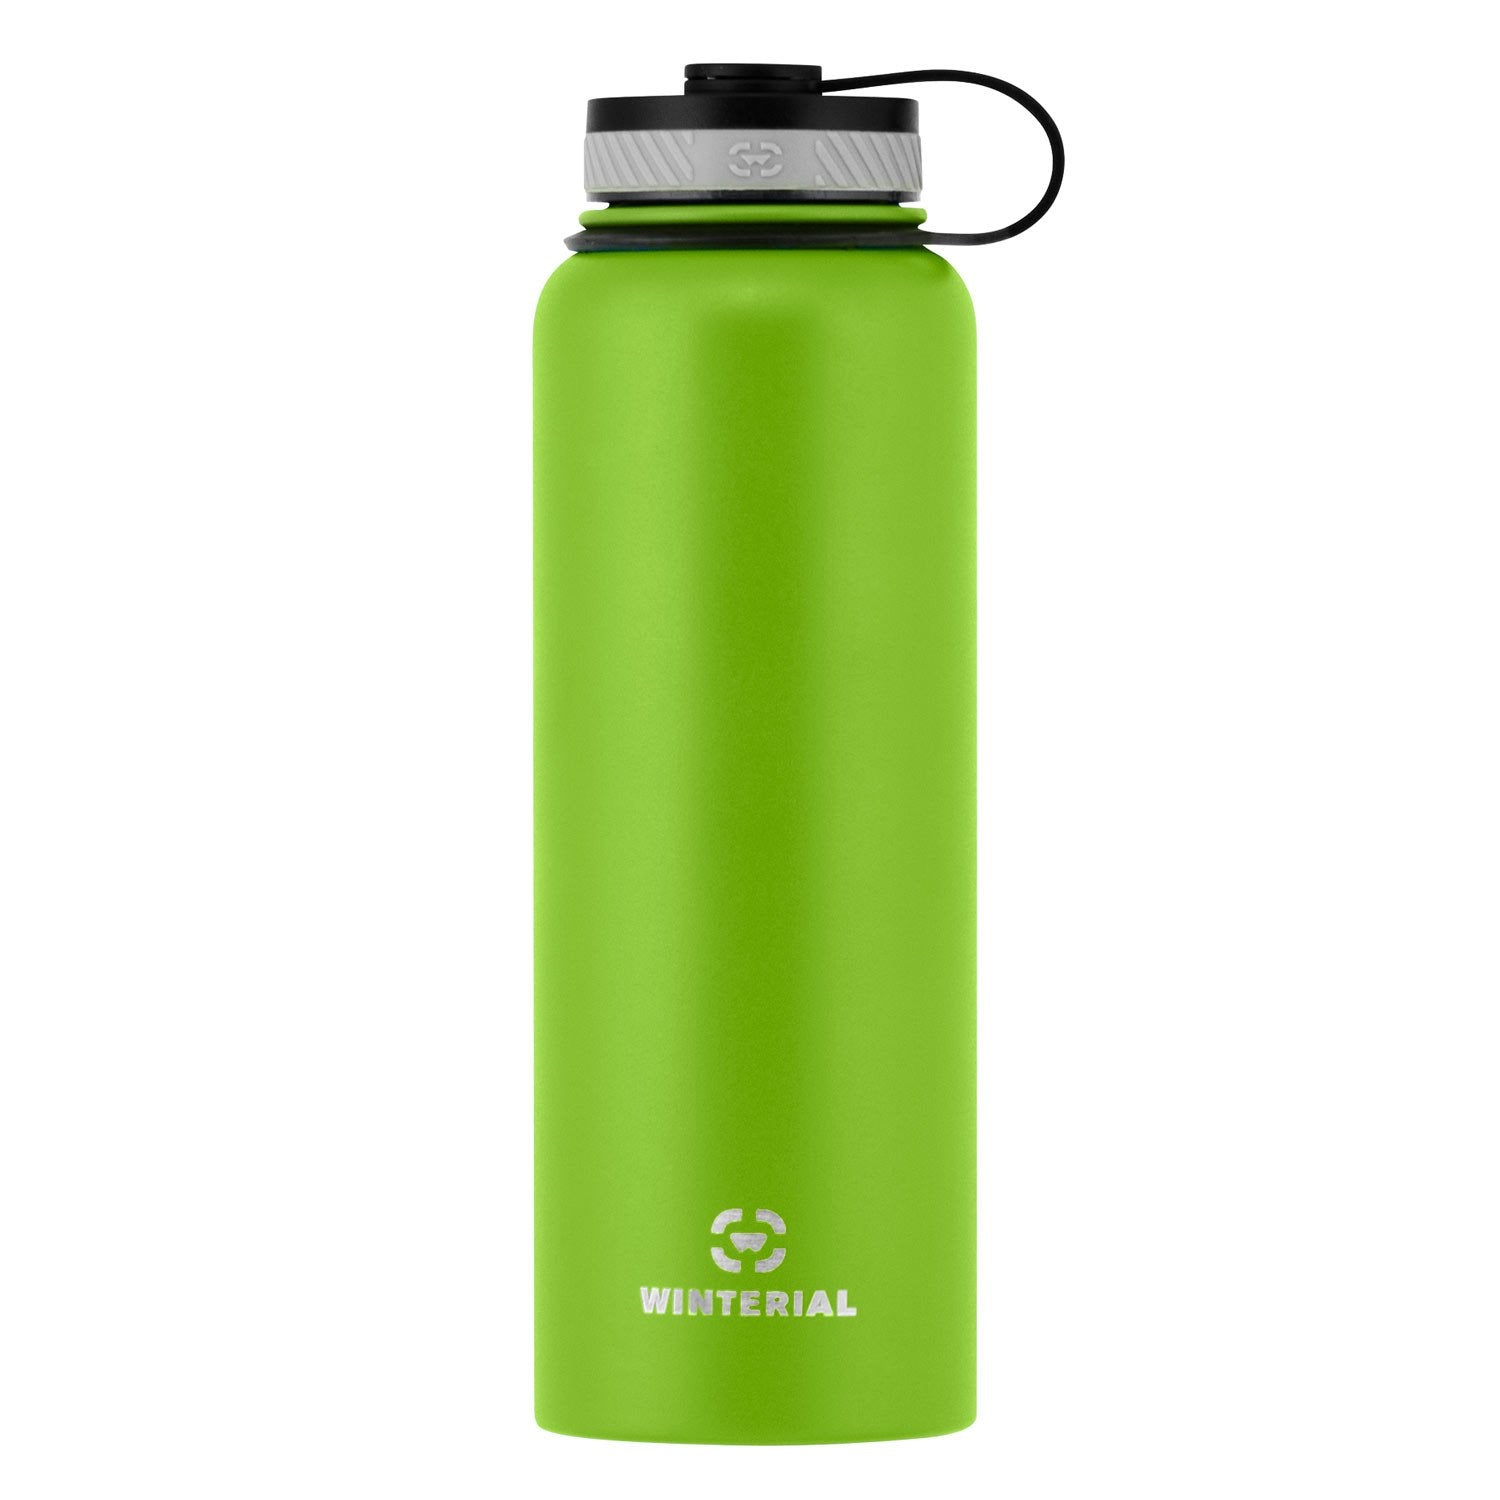 ThermoFlask Stainless Steel Vacuum Insulated Hot Cold Water Bottle 40 Oz  Green